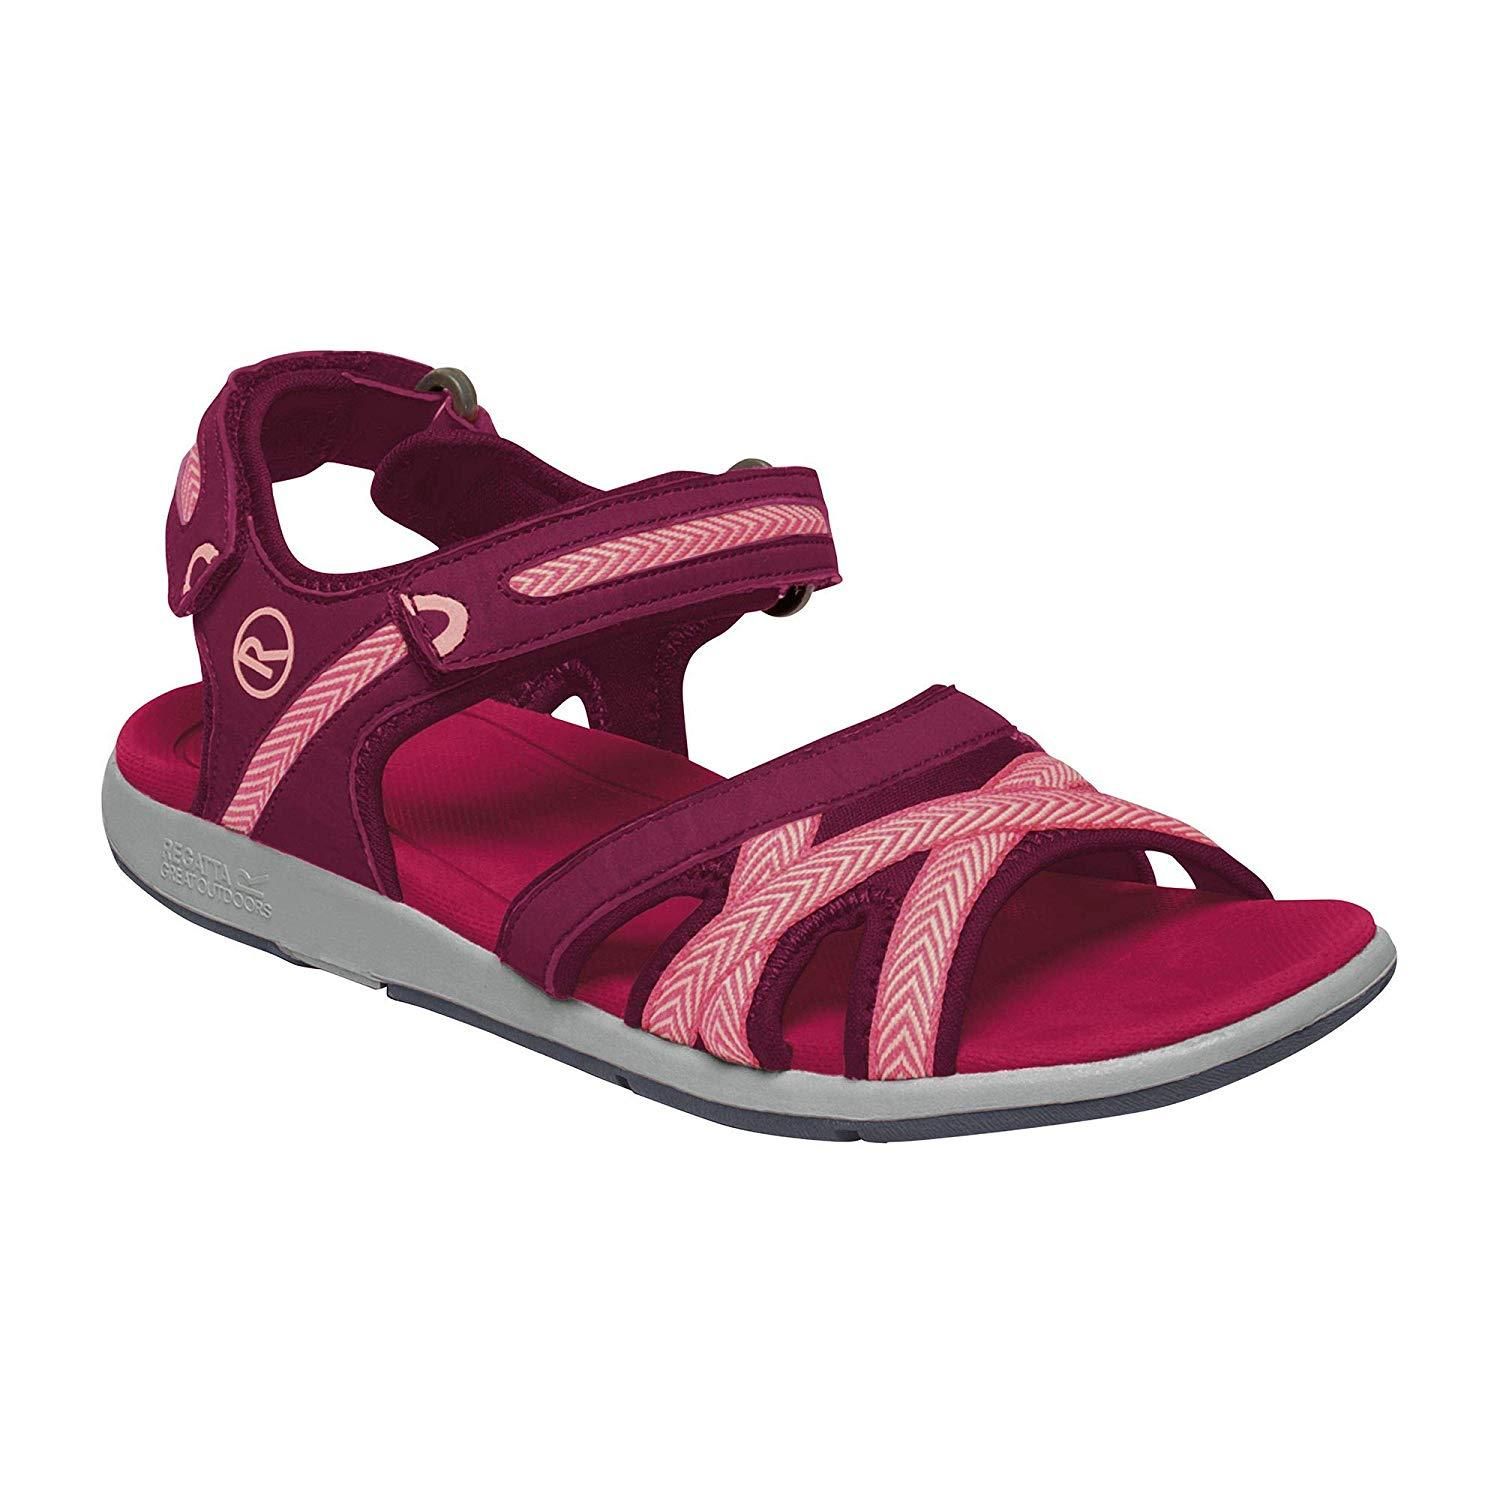 50% Polyester, 45% Polyurathane, 5% Polyamide. 2 points of adjusment for versatile fit. Adjustable hook and loop straps to ensure correct fit.Shock absorbing compression moulded EVA footbed. Lightweight low profile rubber outsole - great grip and hardwearing.